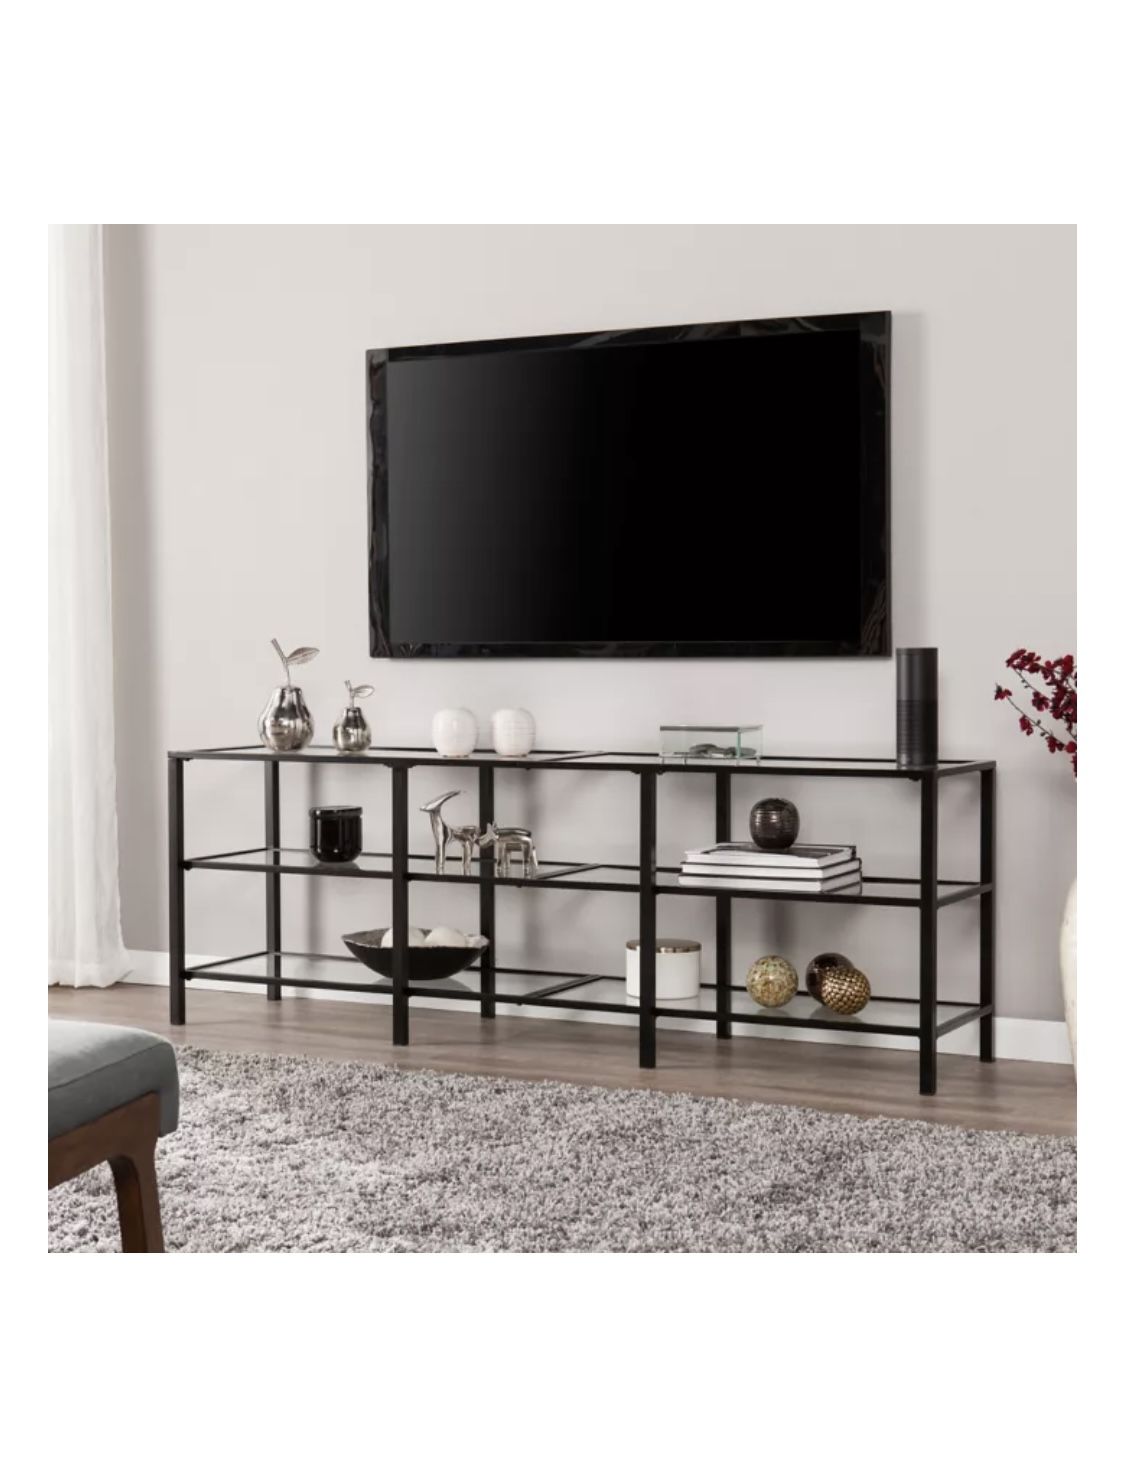 TV Stand/Decorative Shelves in Black